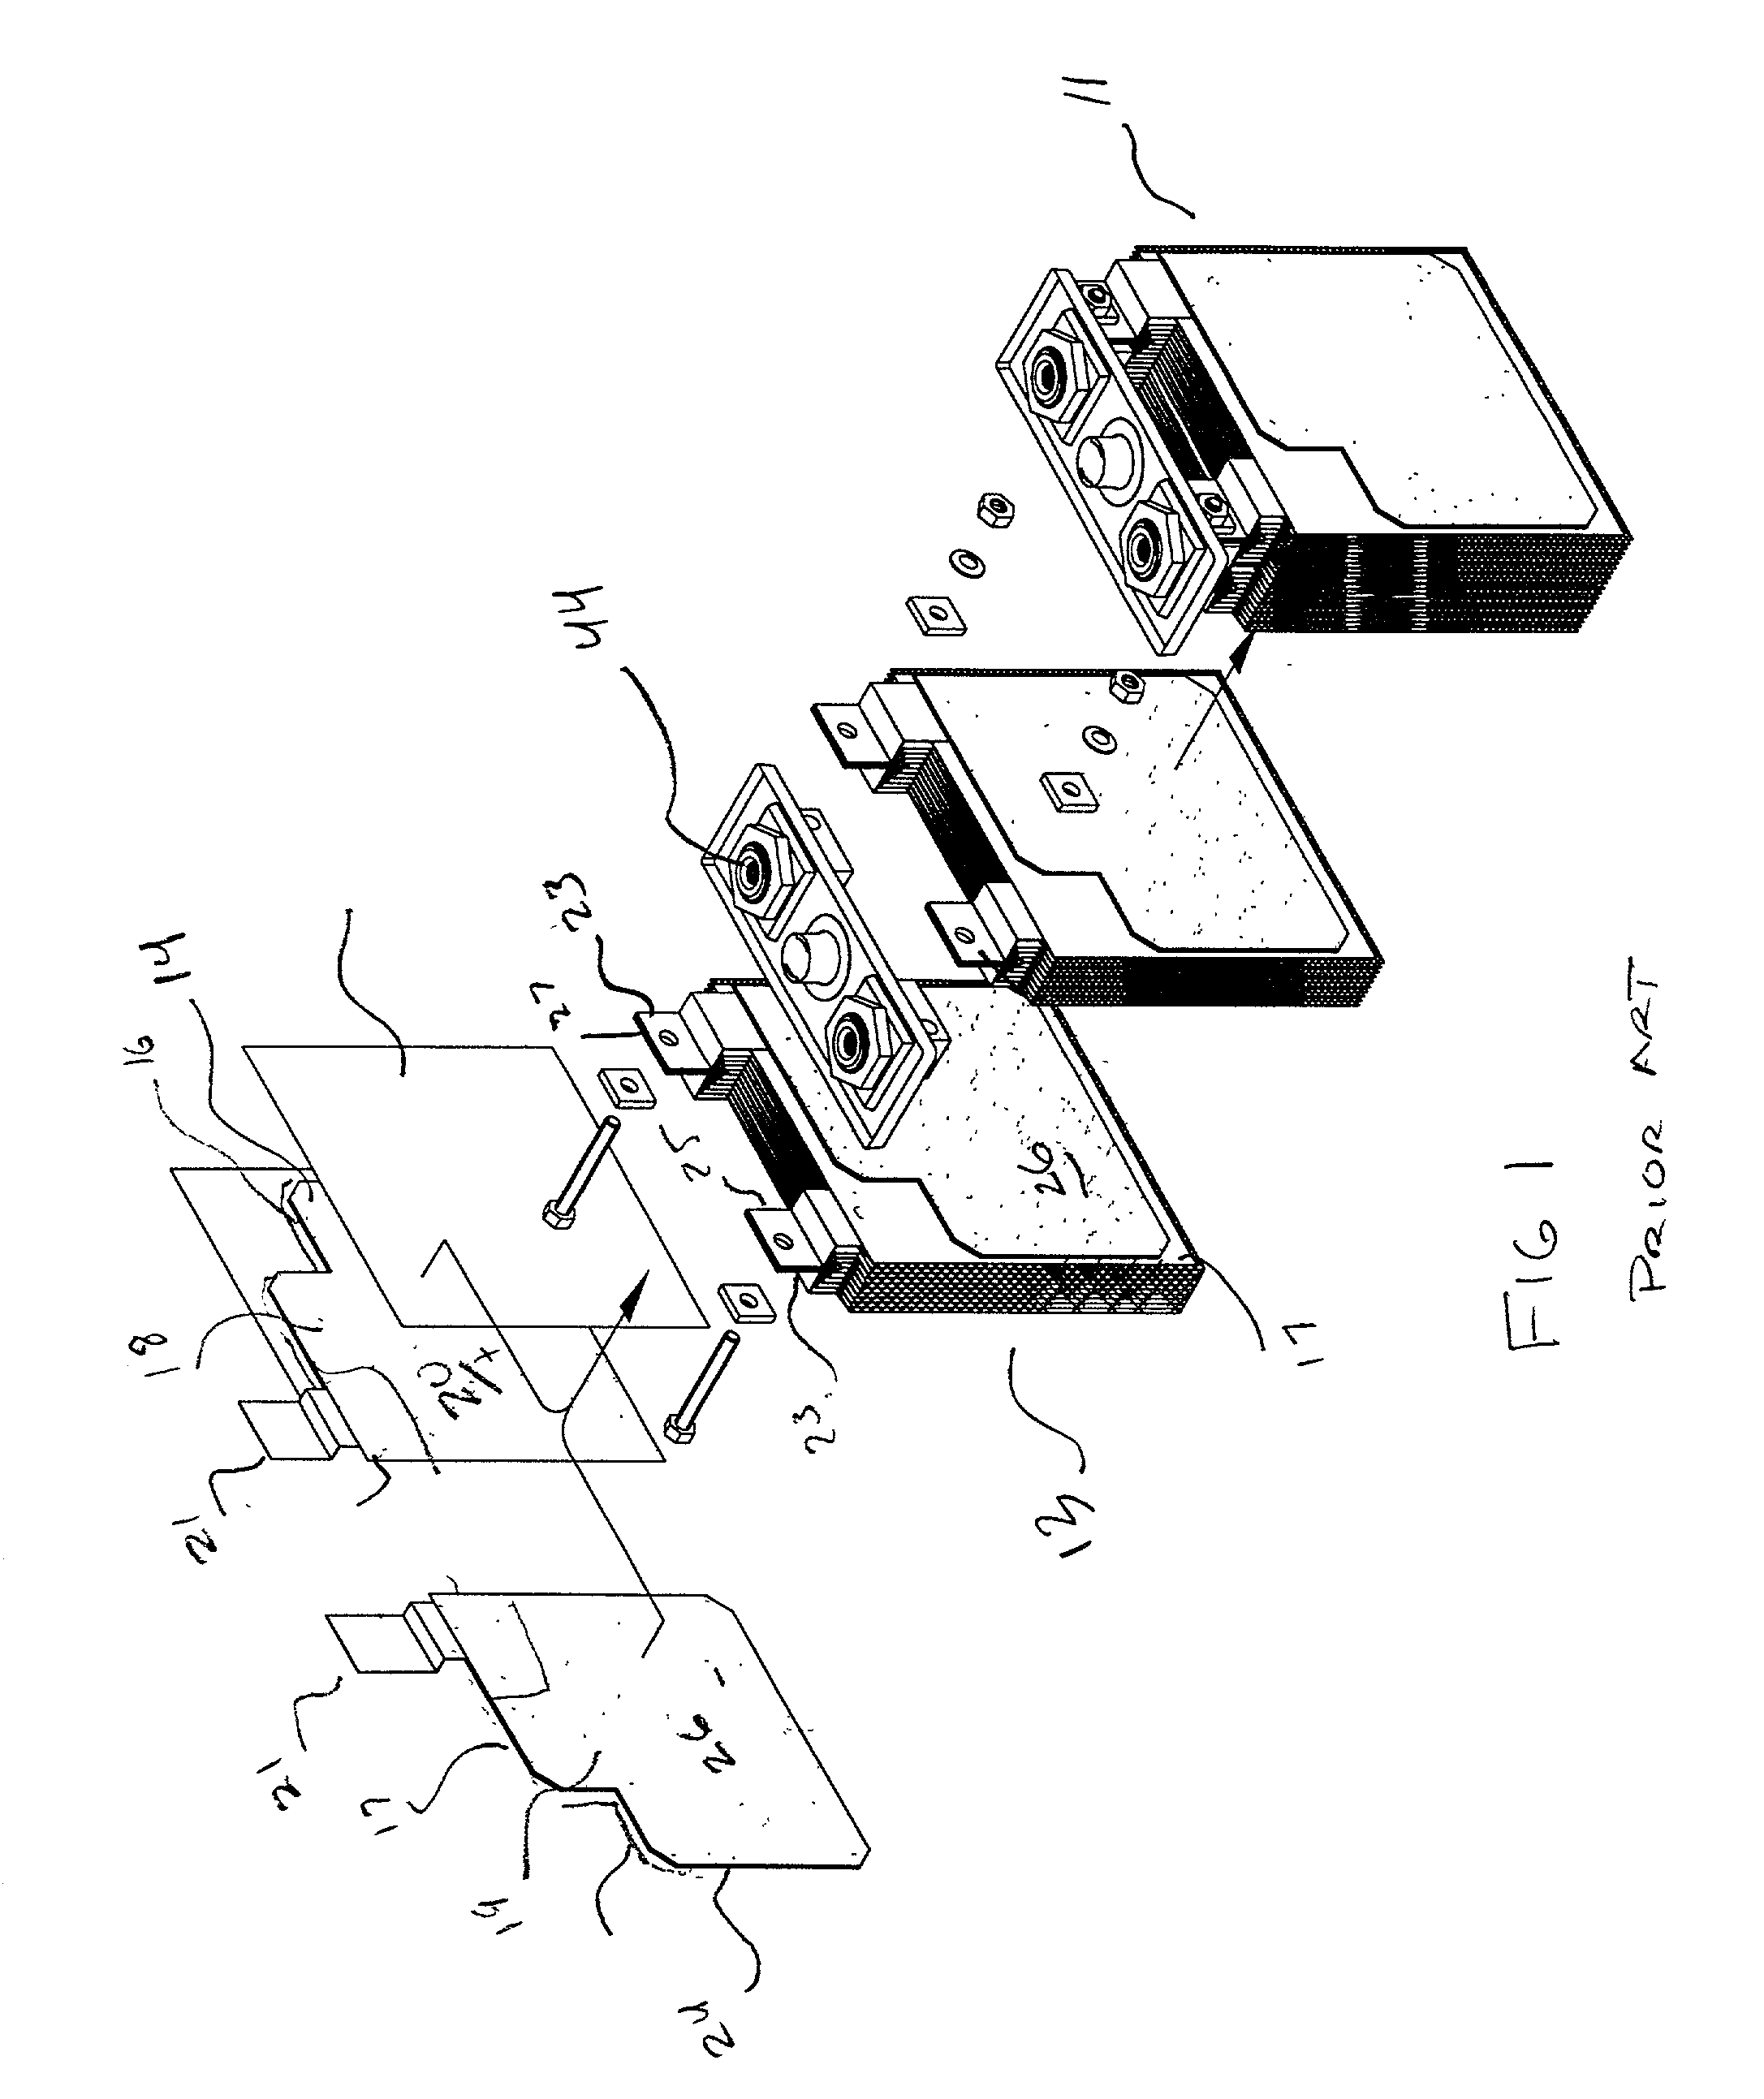 Prismatic battery with maximized and balanced current transmission between electrodes and terminals